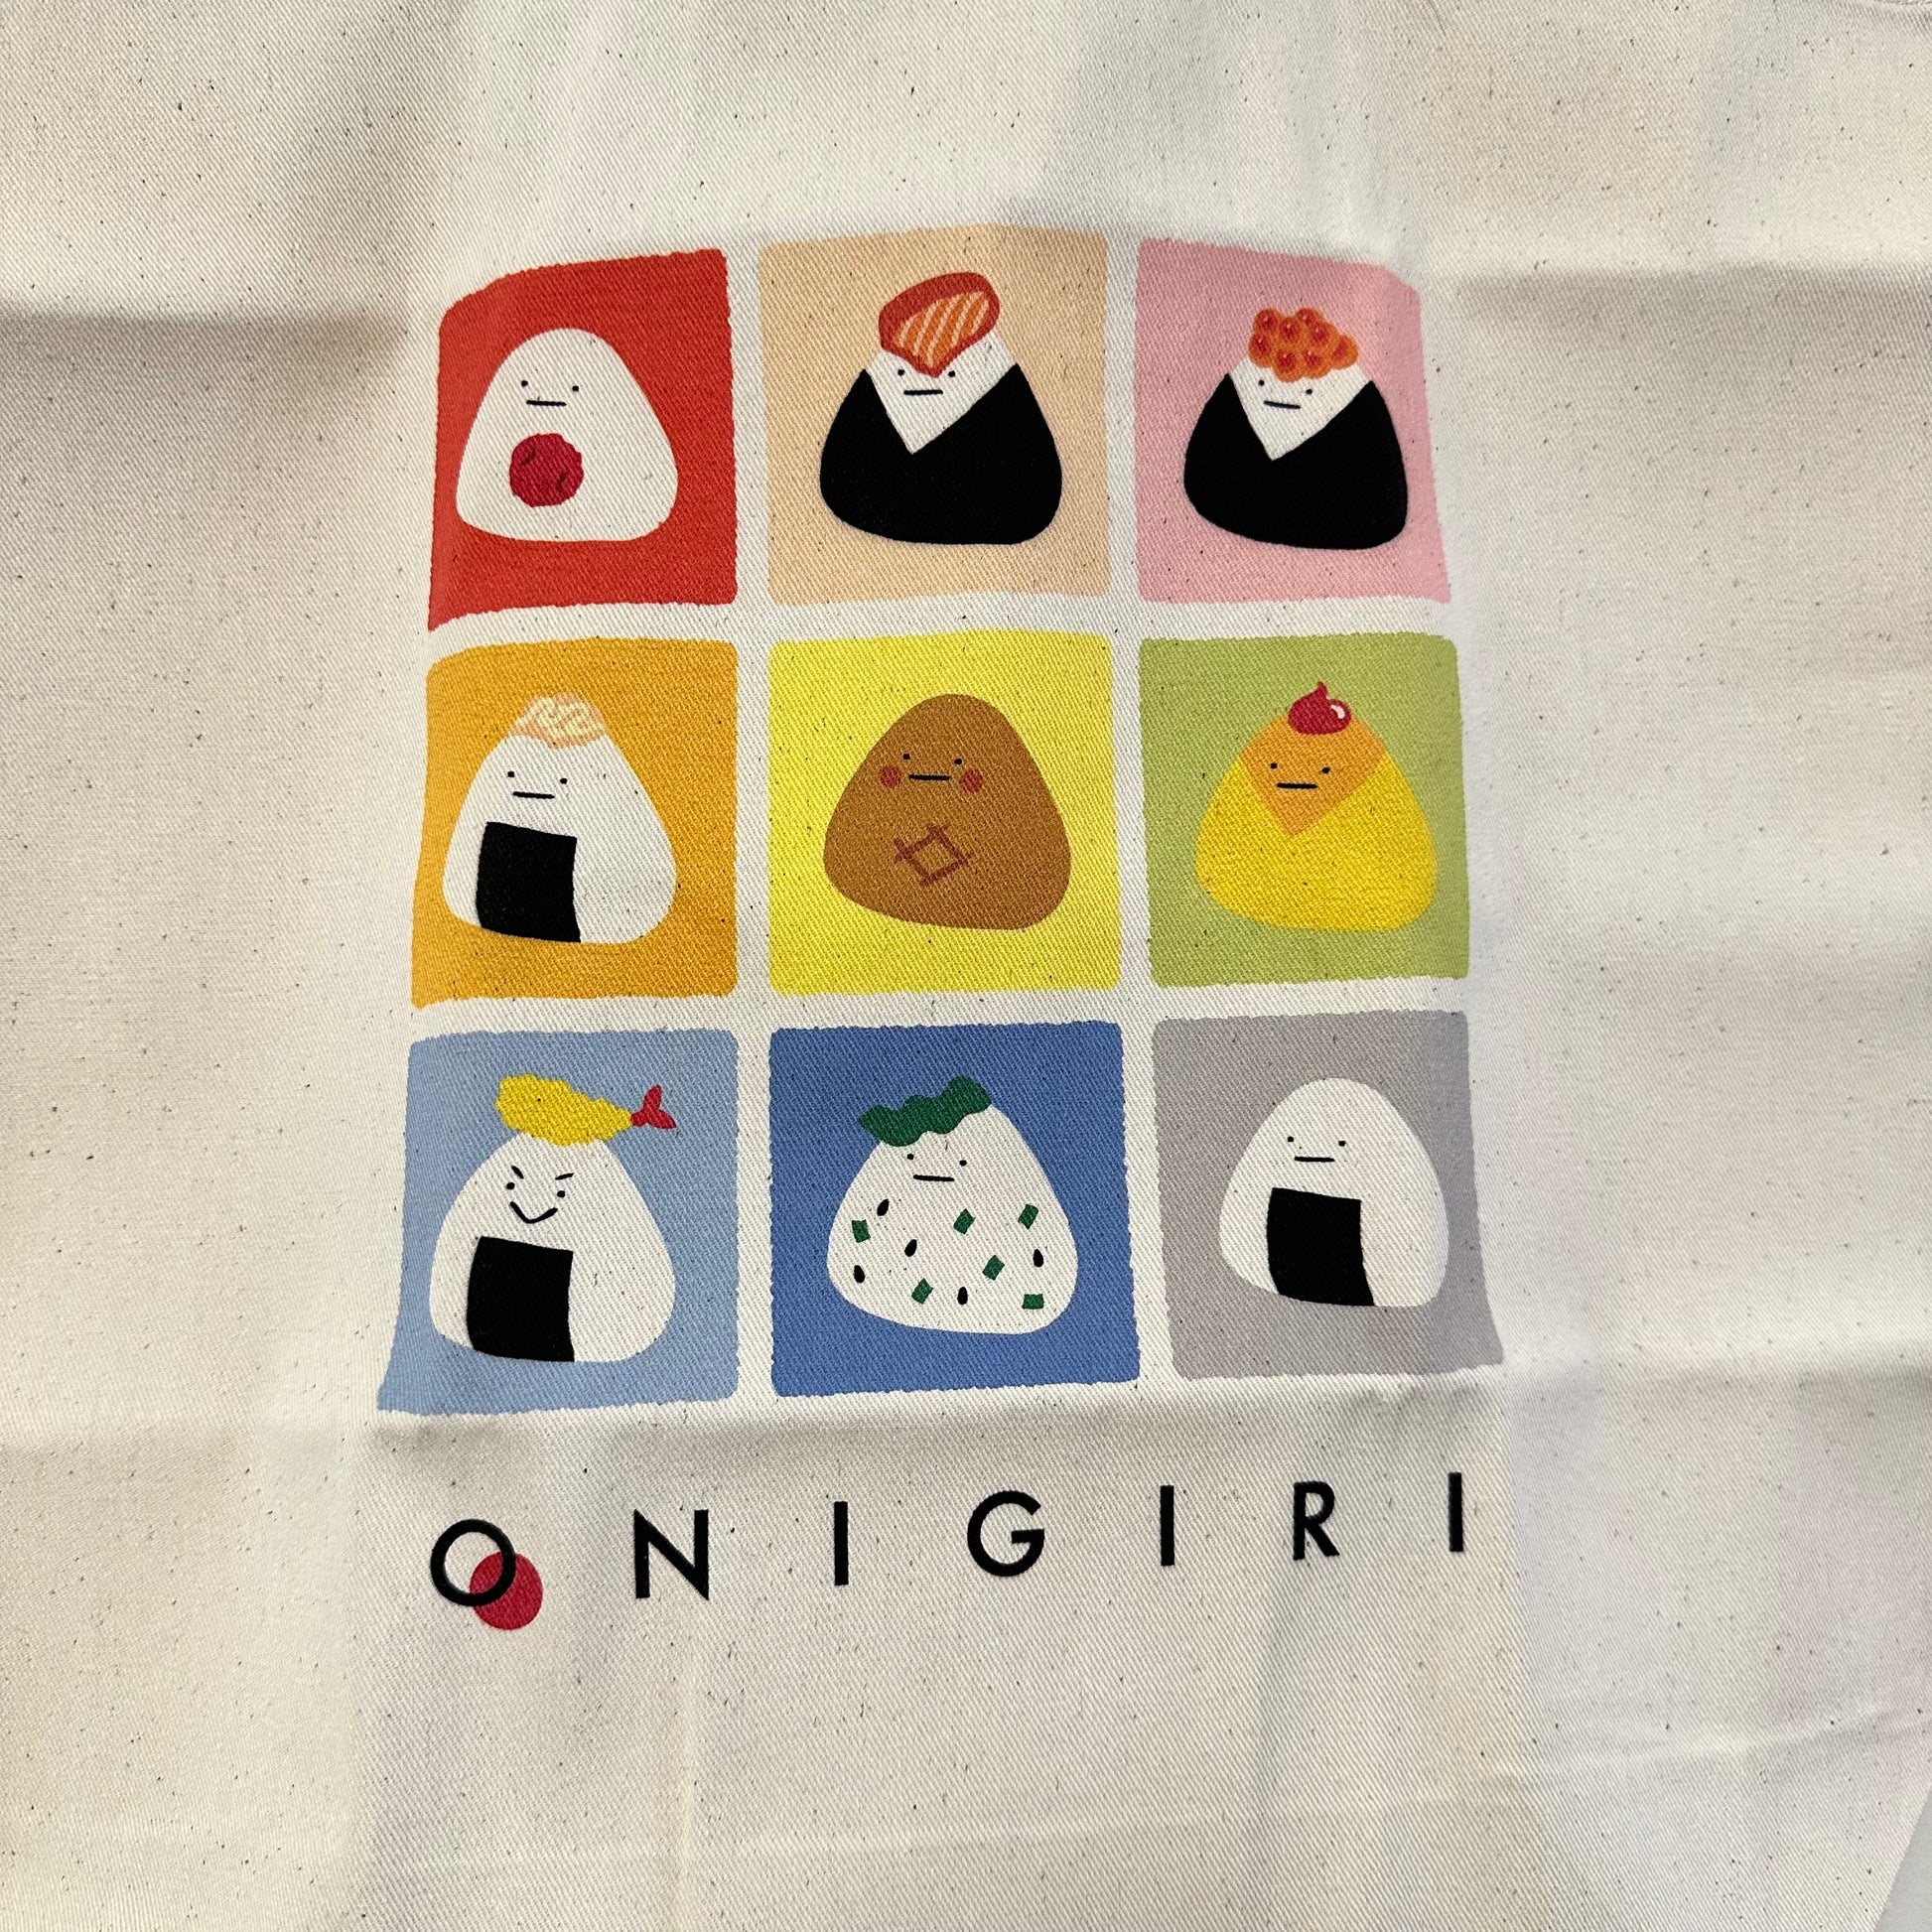 Onigir tote bag with 9 different tiles featuring different flavors of onigiri. 